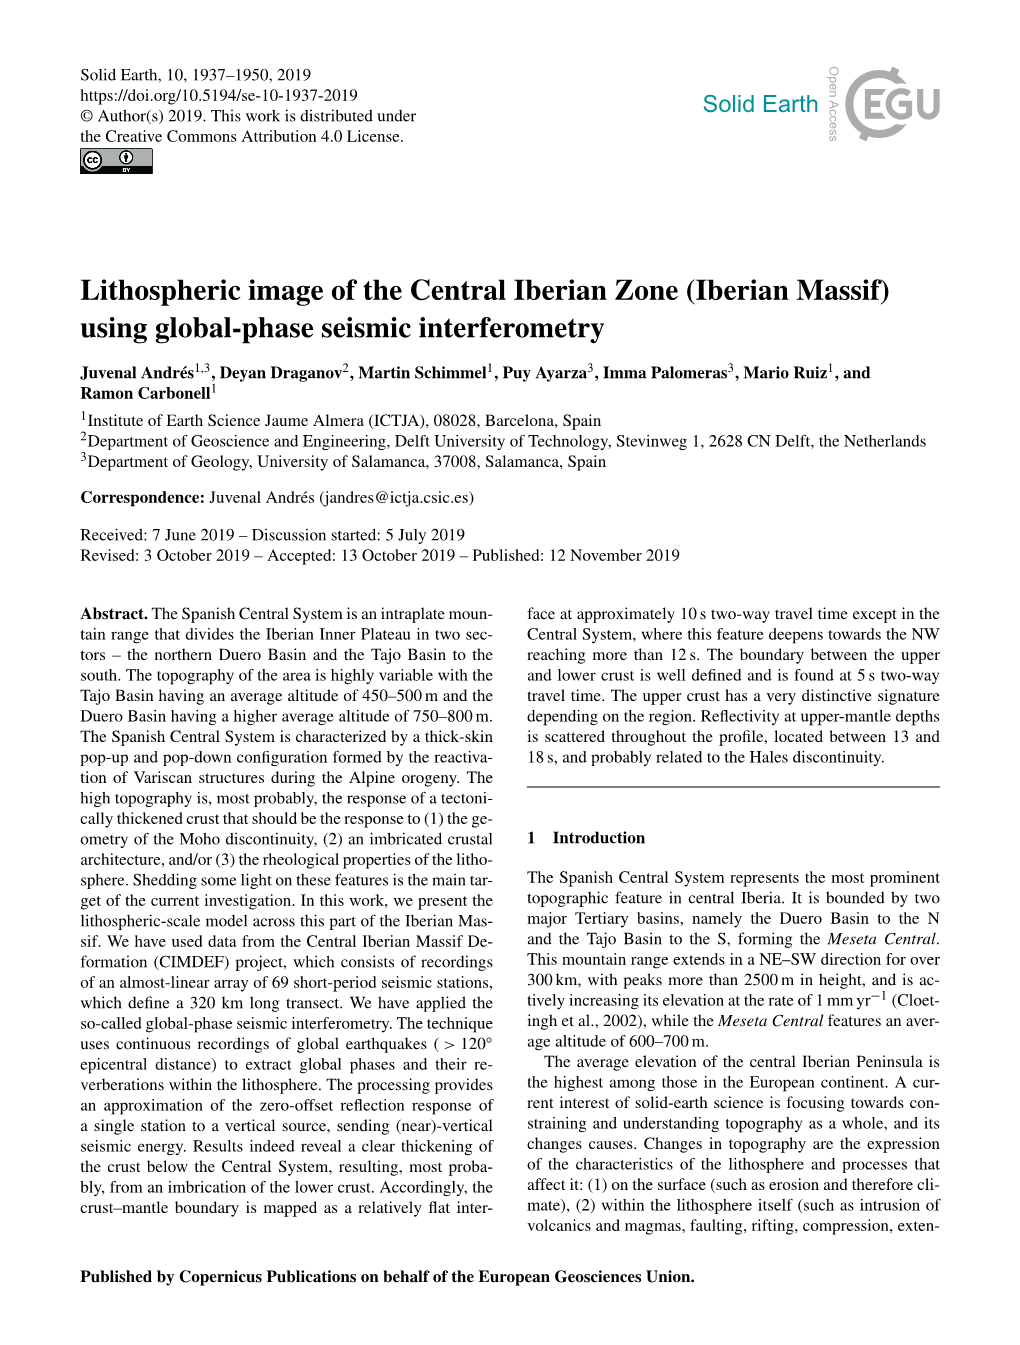 Lithospheric Image of the Central Iberian Zone (Iberian Massif) Using Global-Phase Seismic Interferometry